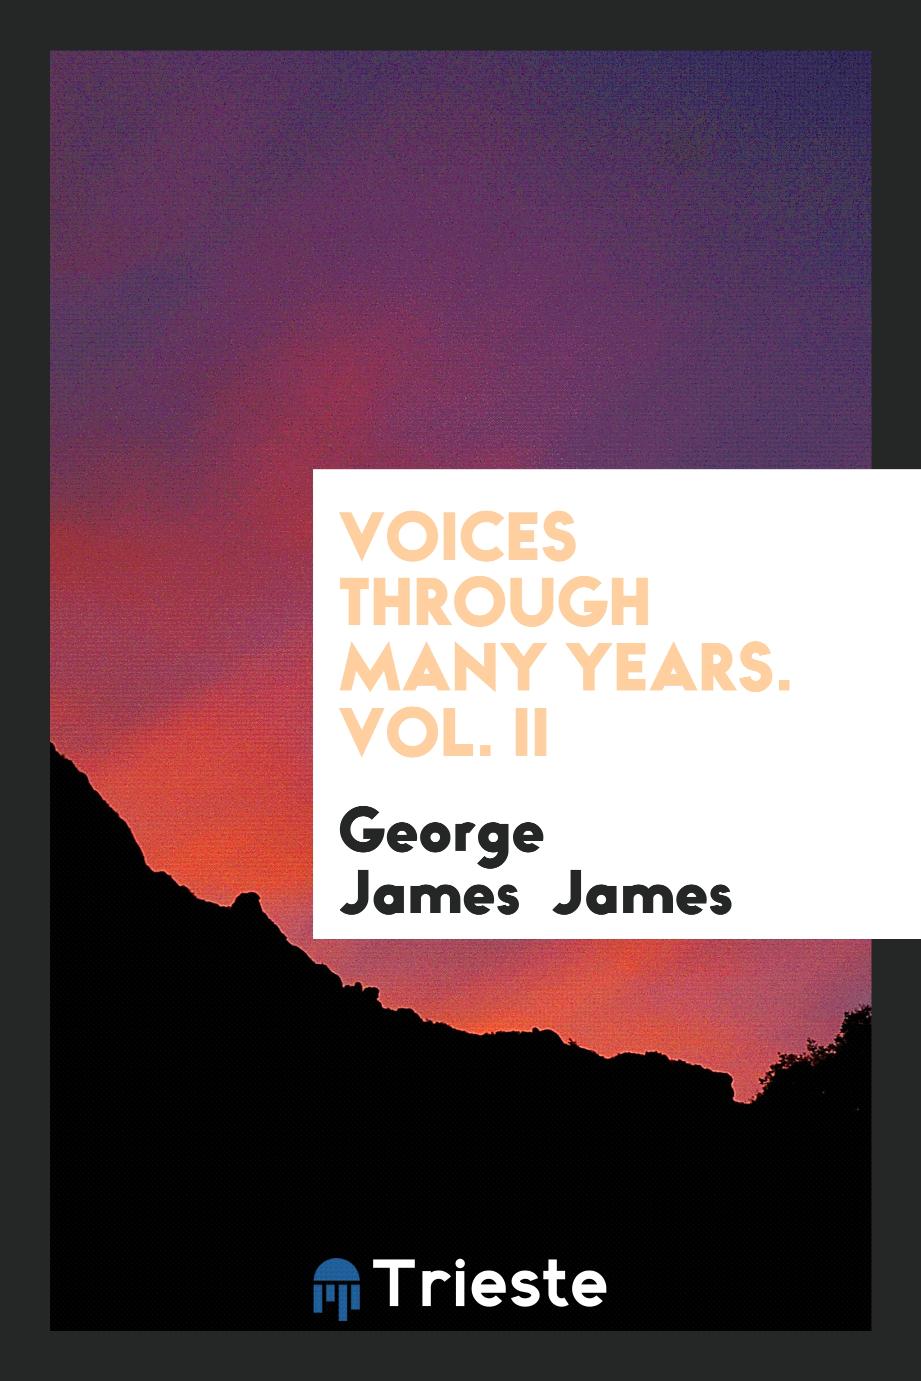 Voices through many years. Vol. II